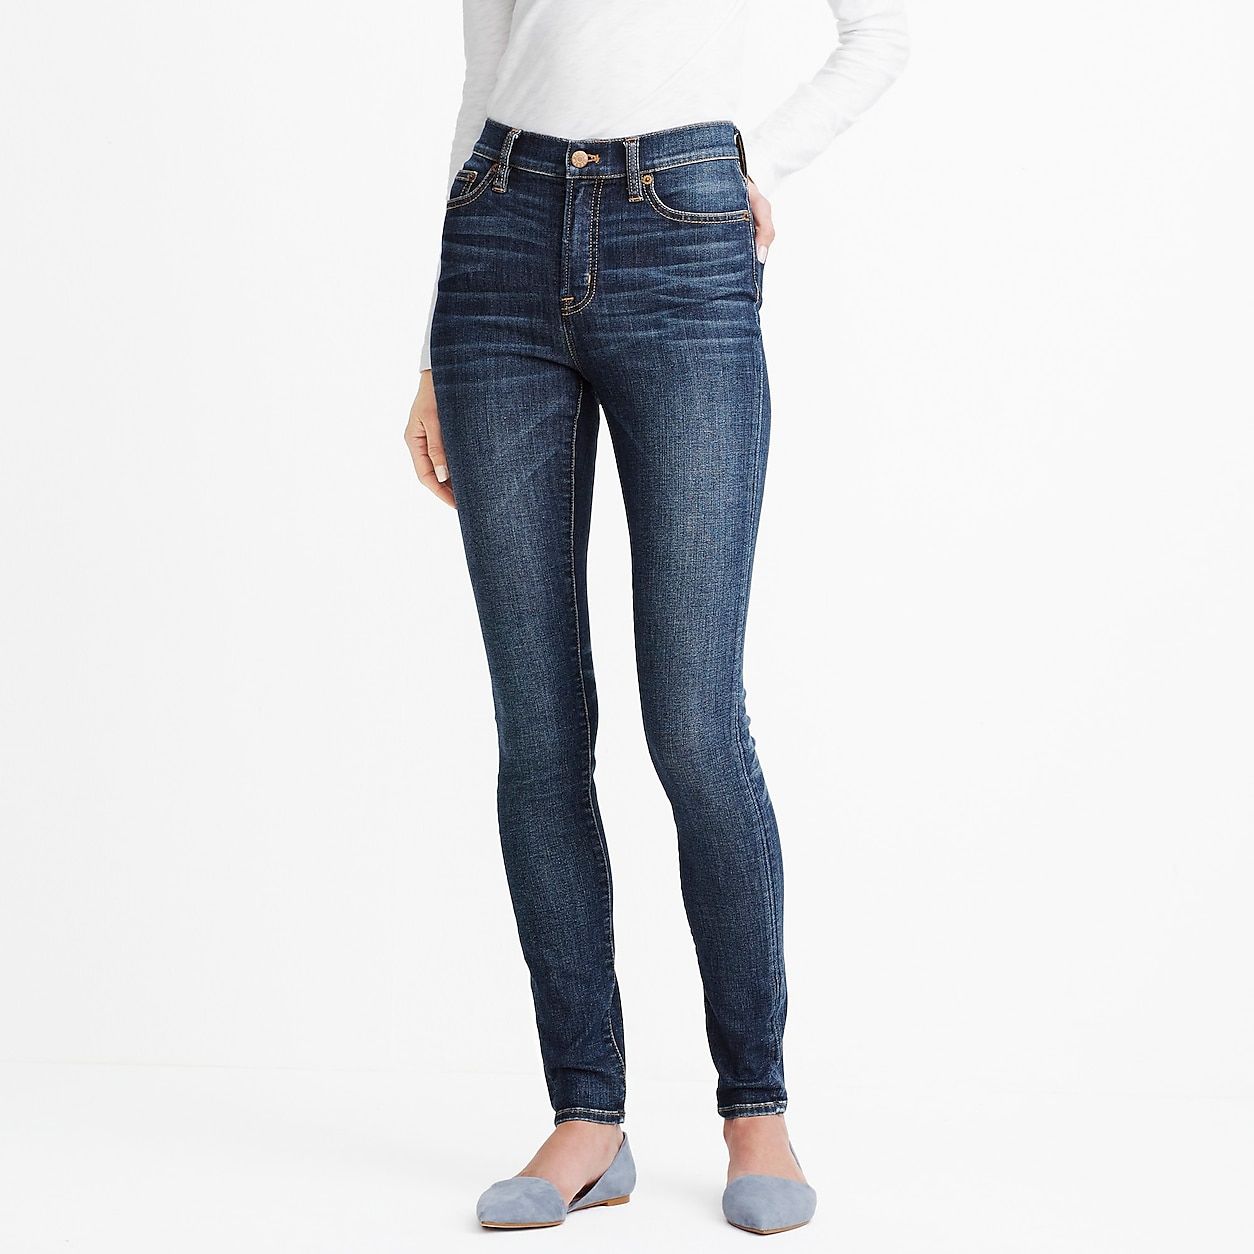 Classic blue wash high-rise skinny jean with 29" inseam | J.Crew Factory